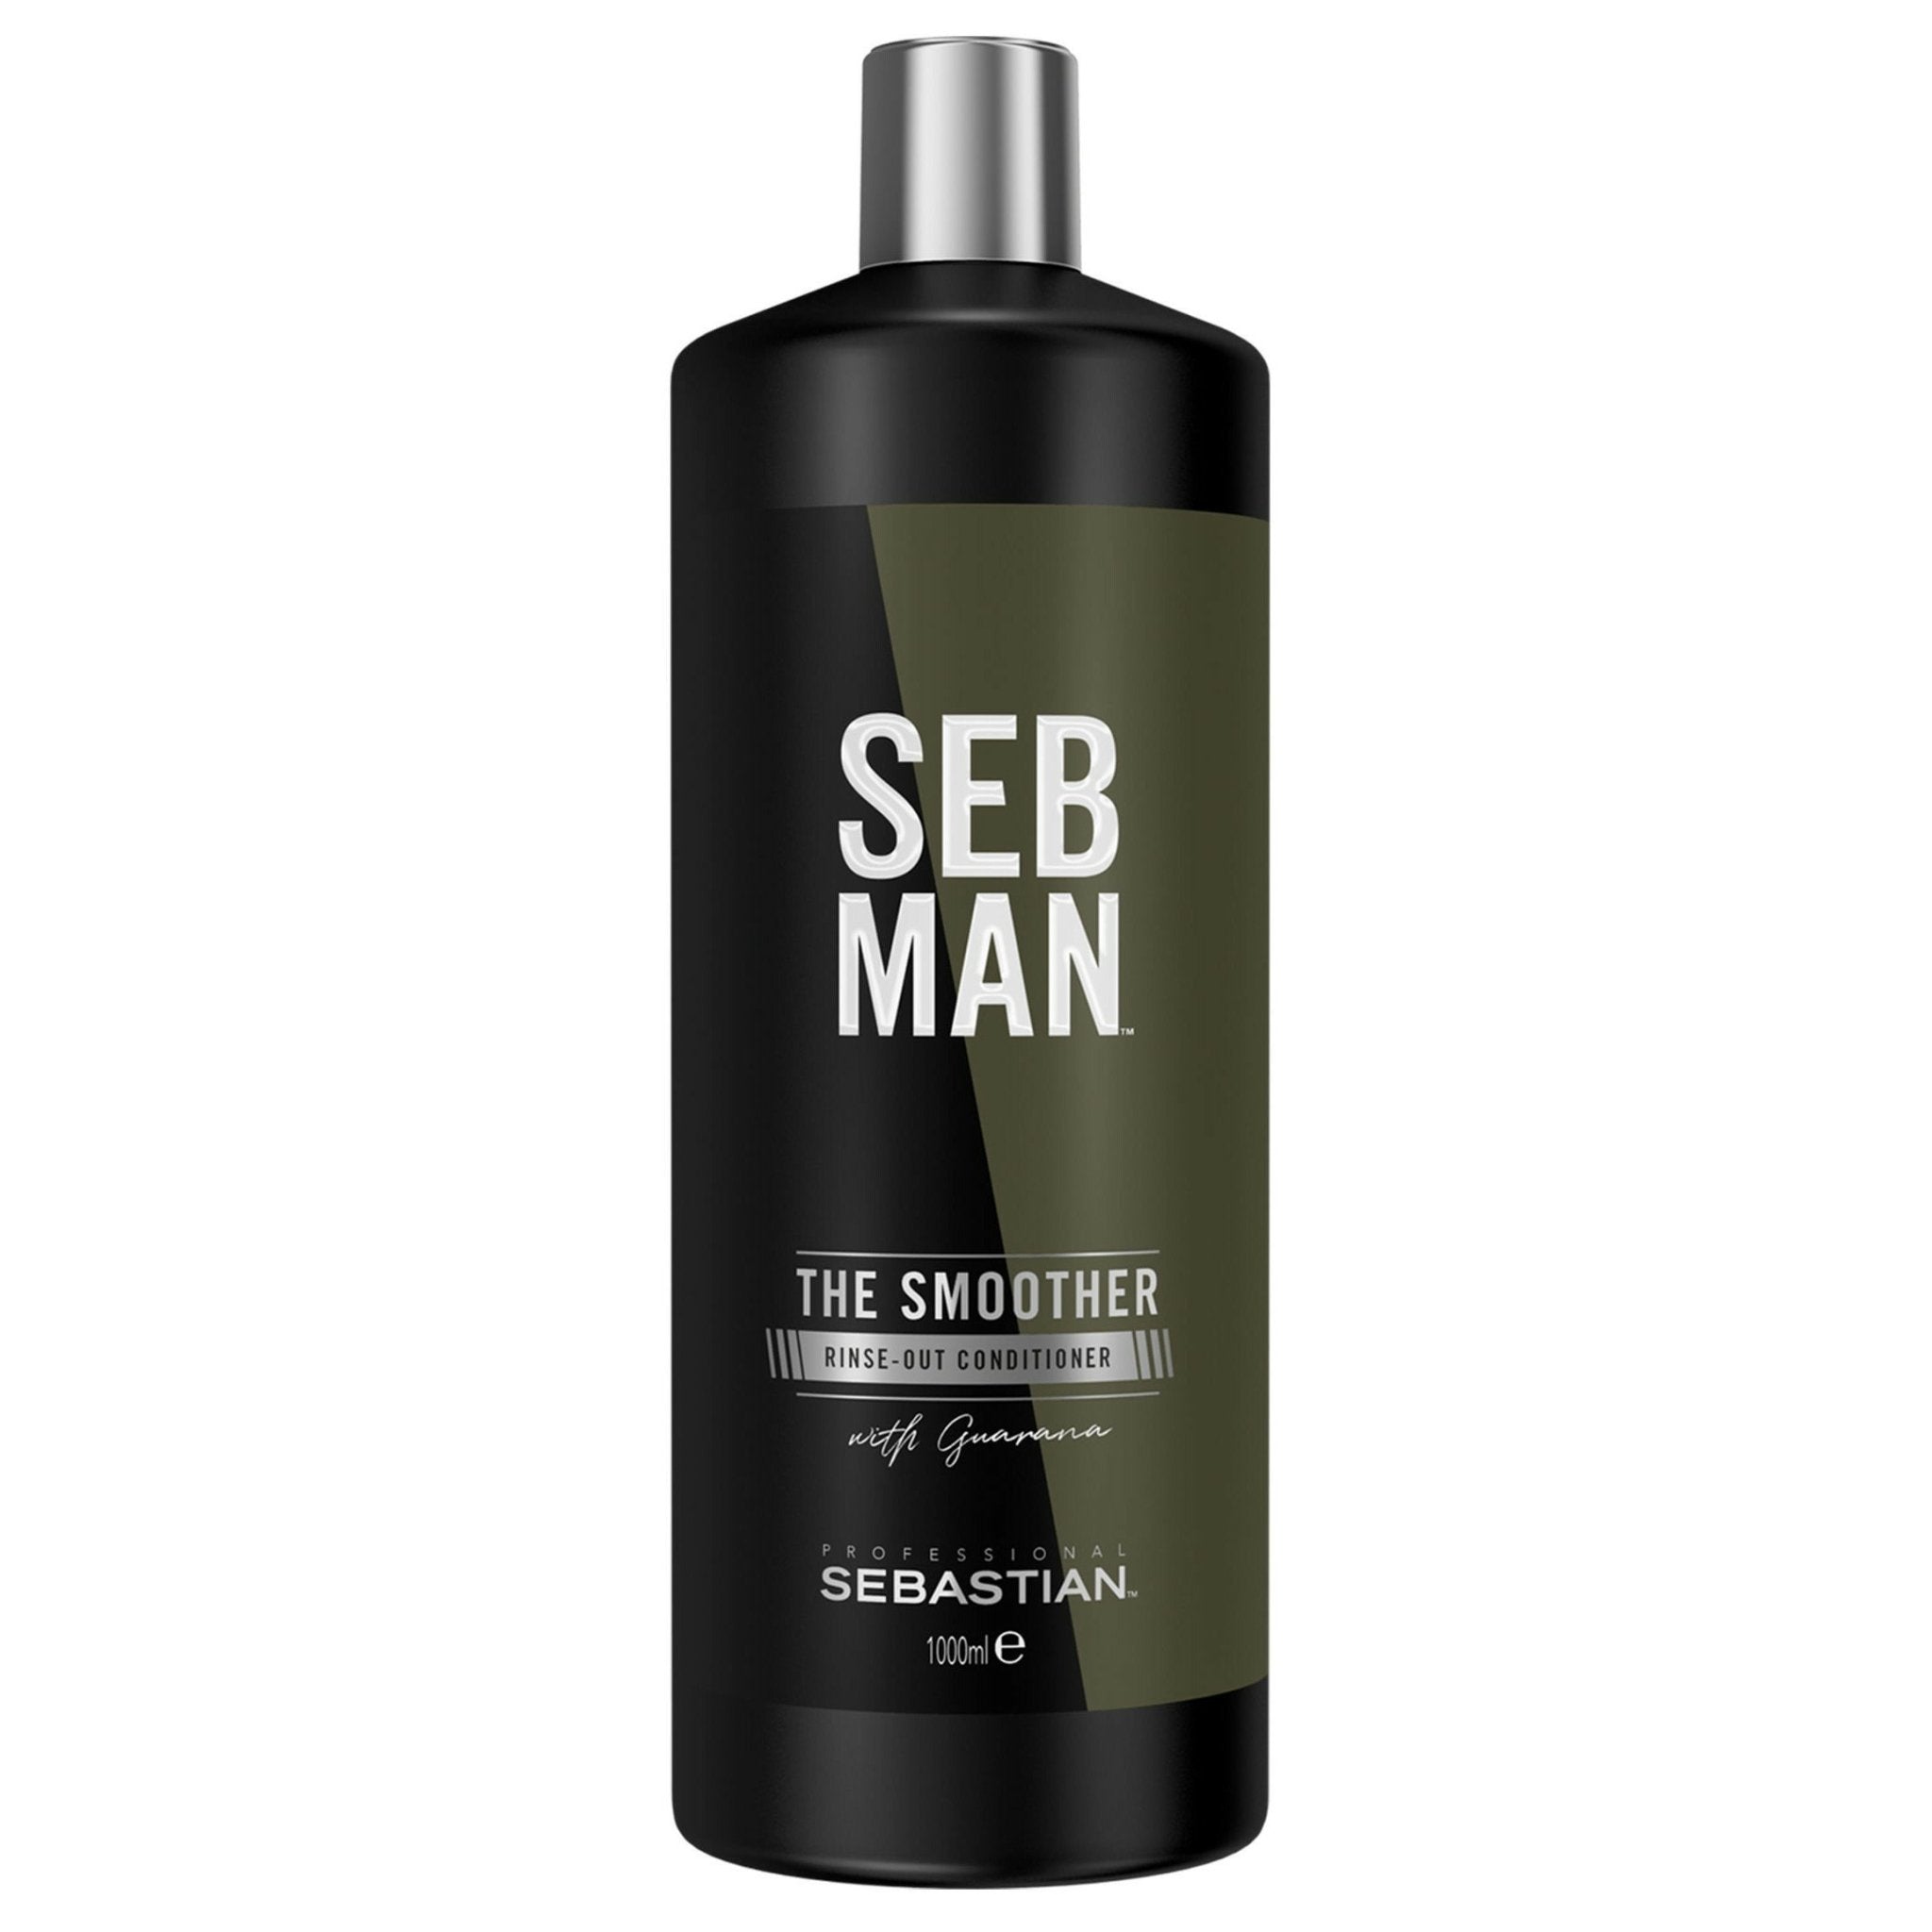 Seb Man. Revitalisant The Smoother - 1000mL - Concept C. Shop